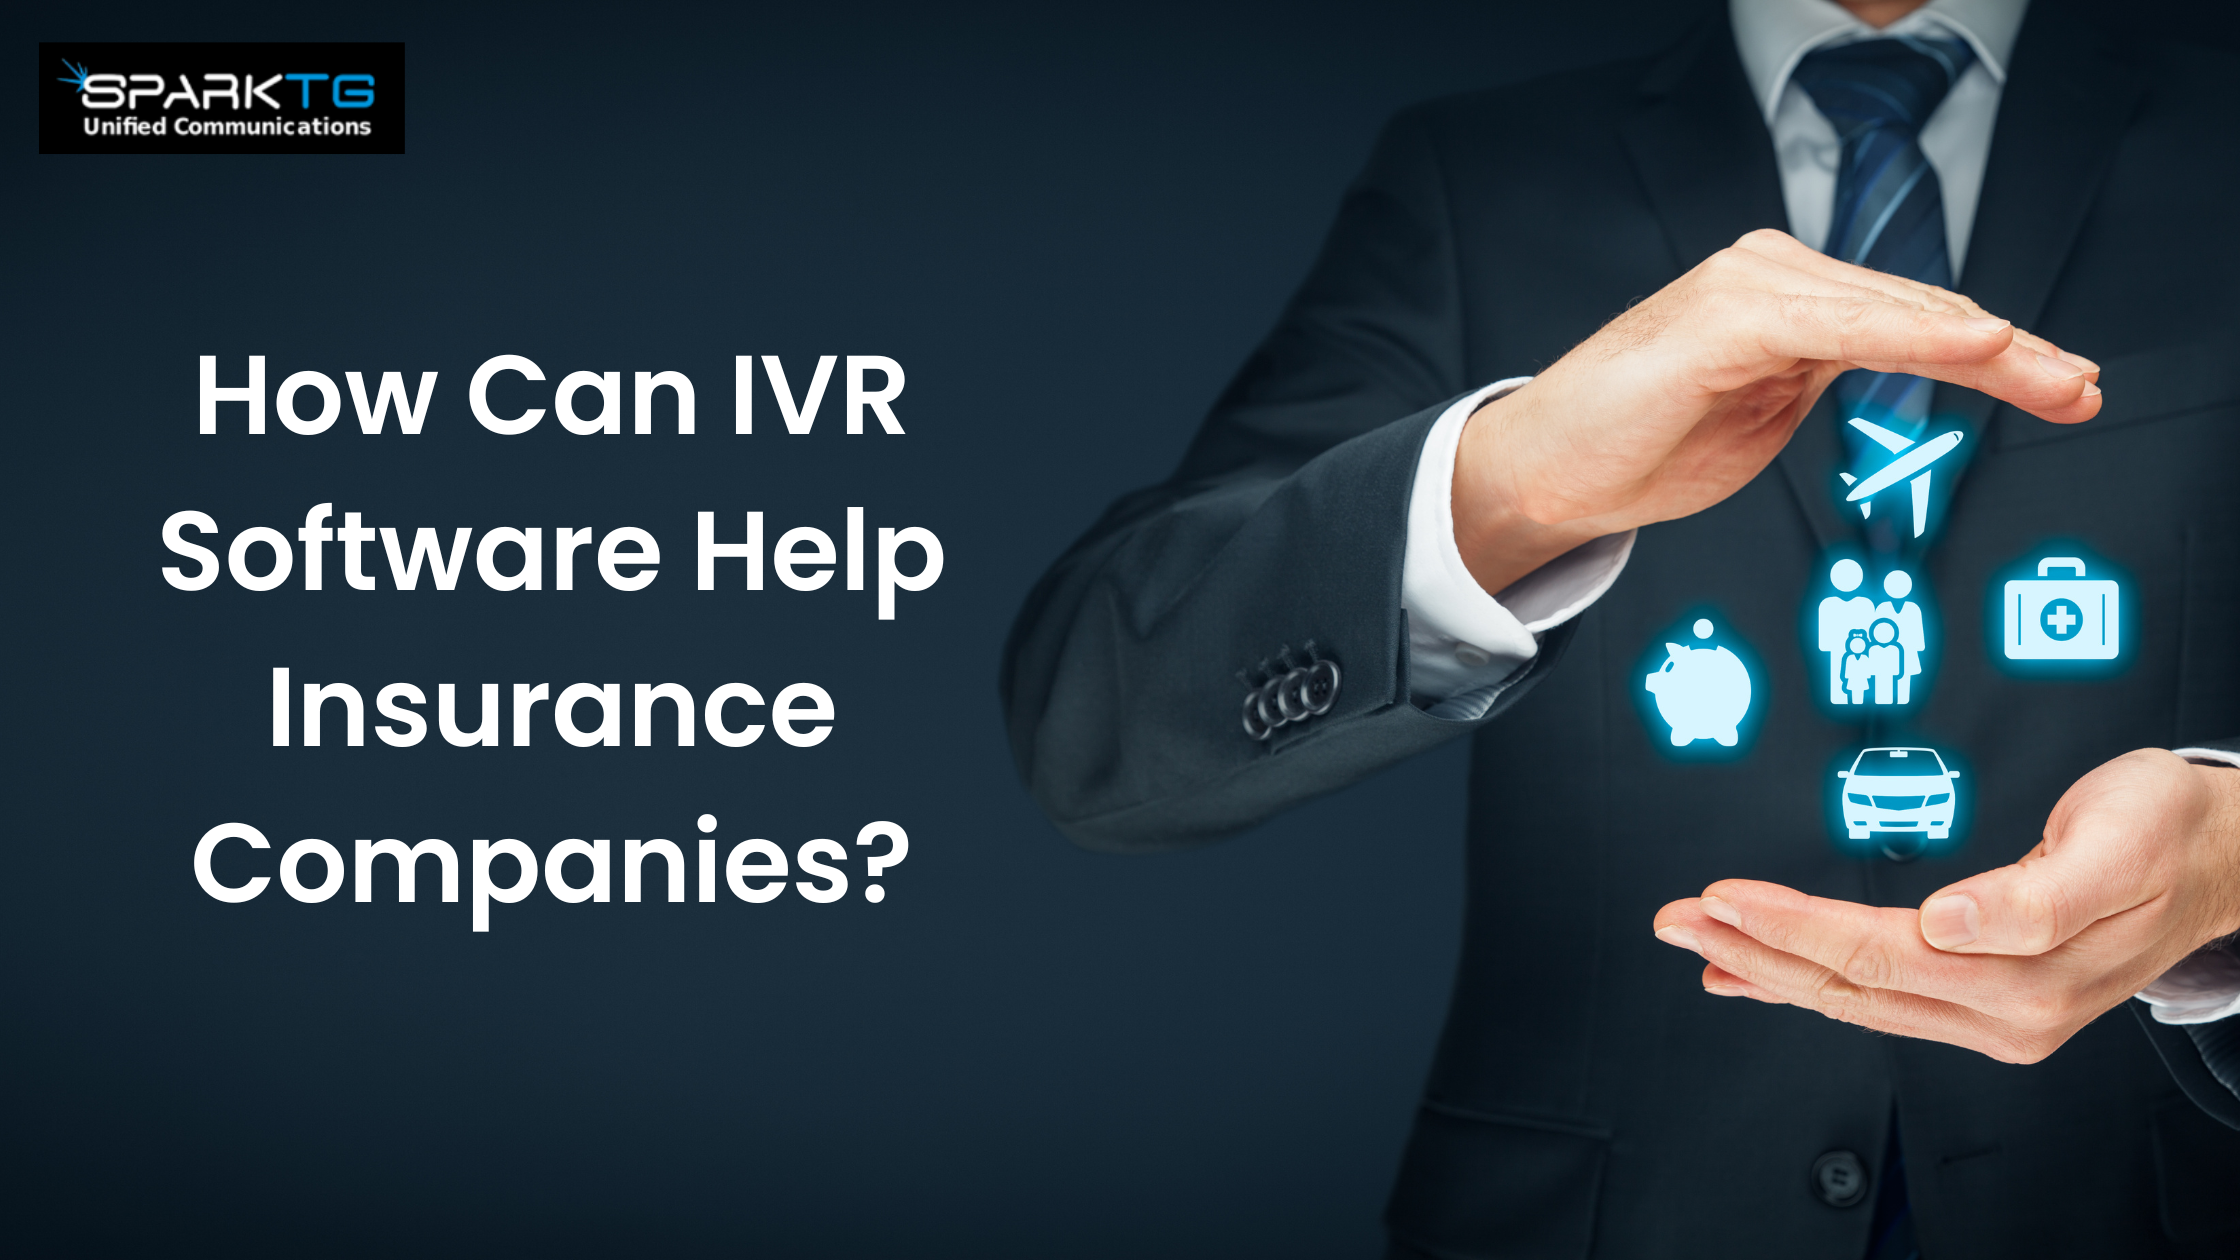 How Sparktg IVR software help Insurance Company